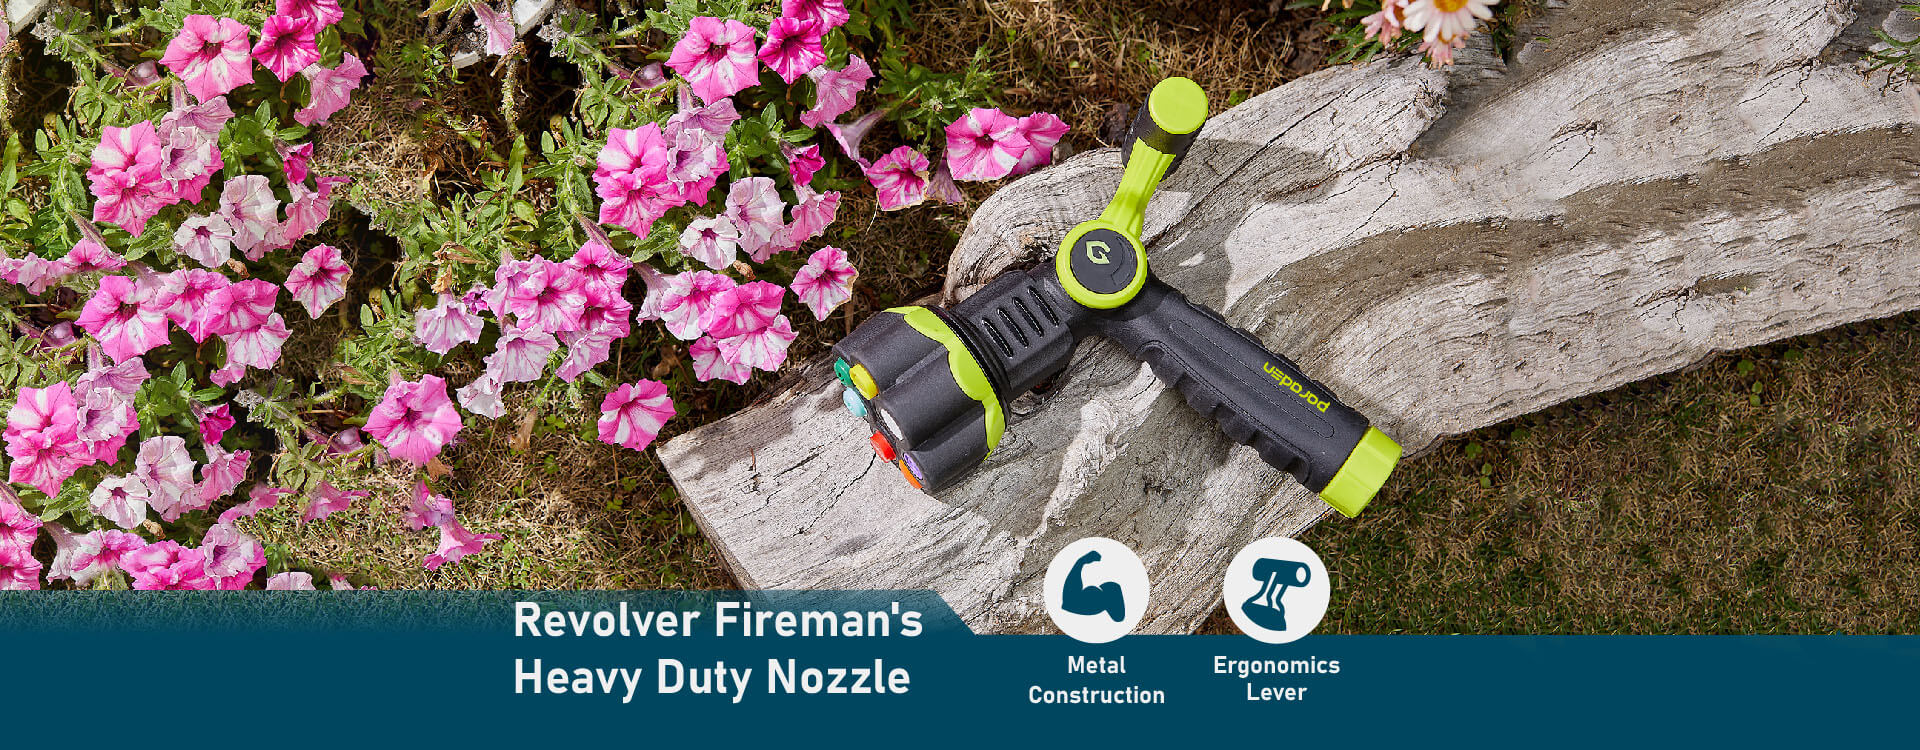 Revolver Fireman's Heavy Duty Nozzle with metal construction and ergonomics lever